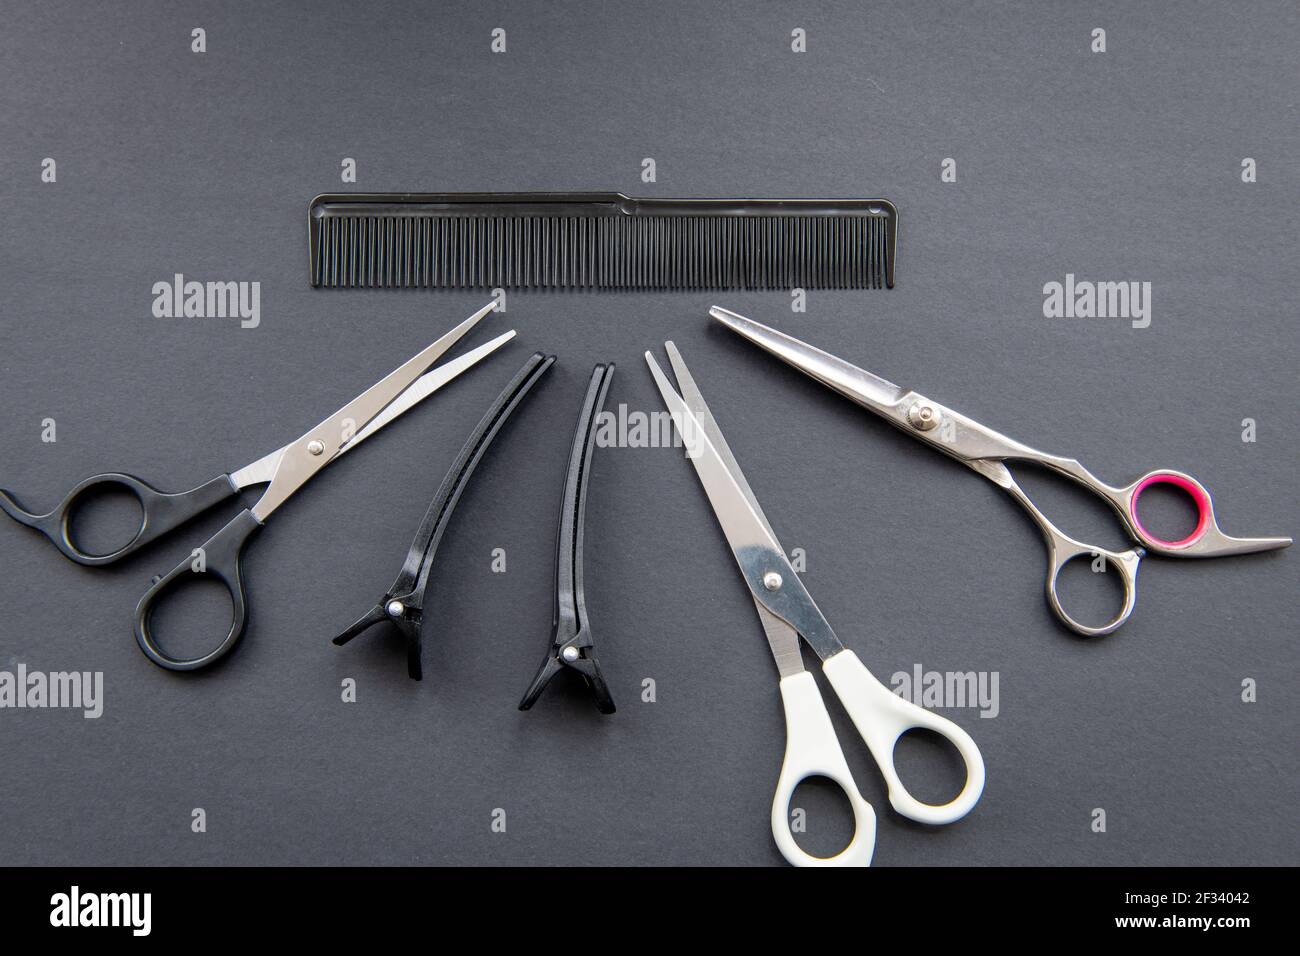 Isolated image of some hair dressing equipment in a dark background. Stock Photo